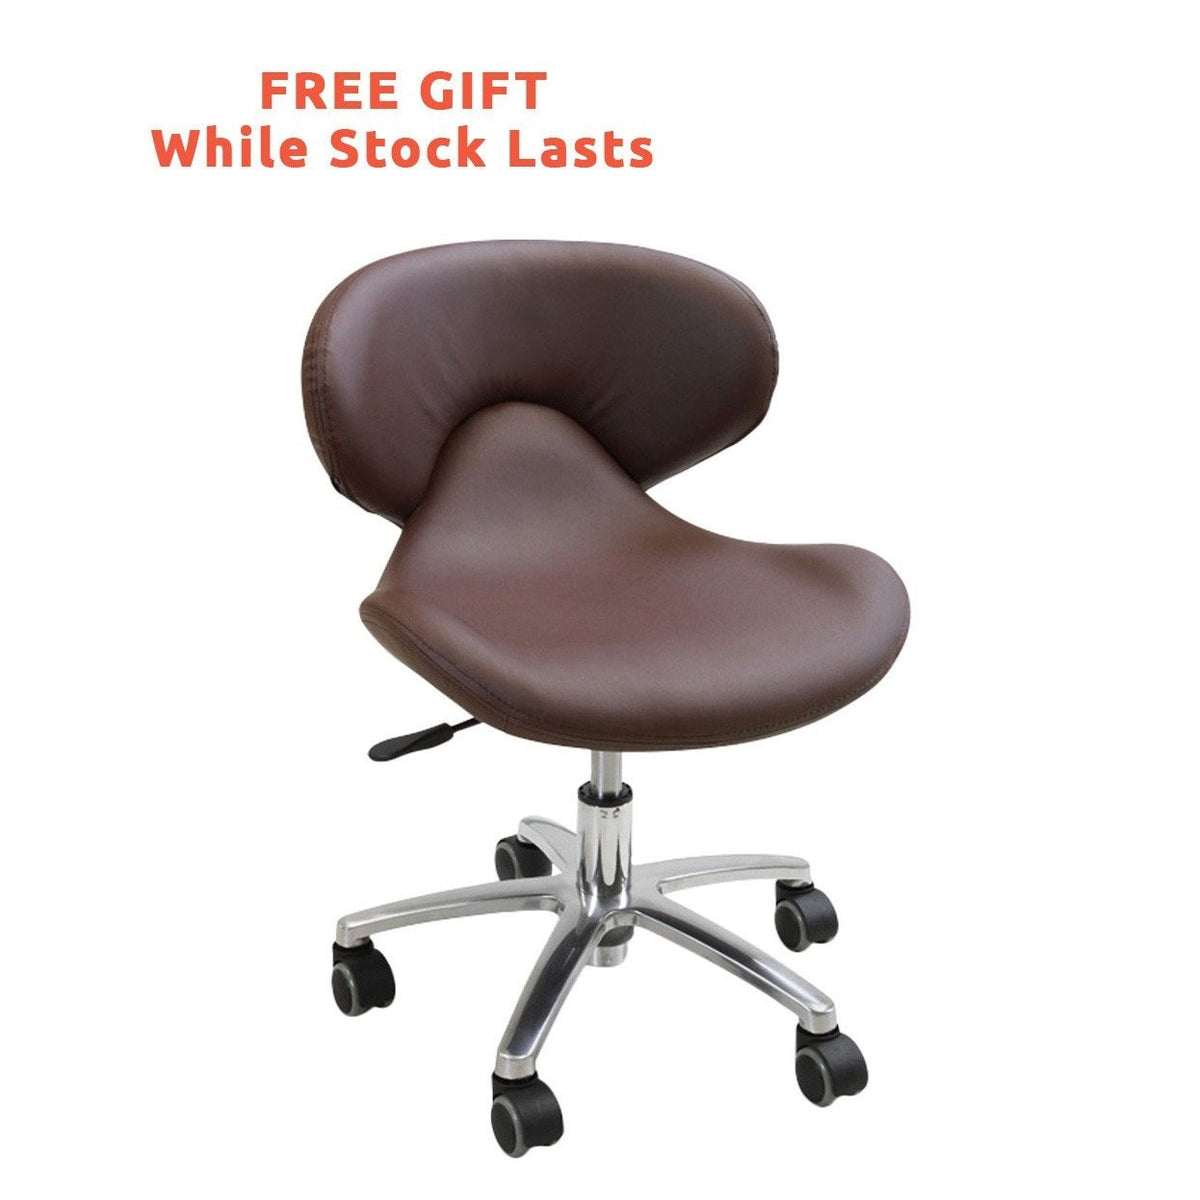 Continuum Continuum Bravo VE Pedicure Spa Chair Pedicure &amp; Spa Chairs - ChairsThatGive